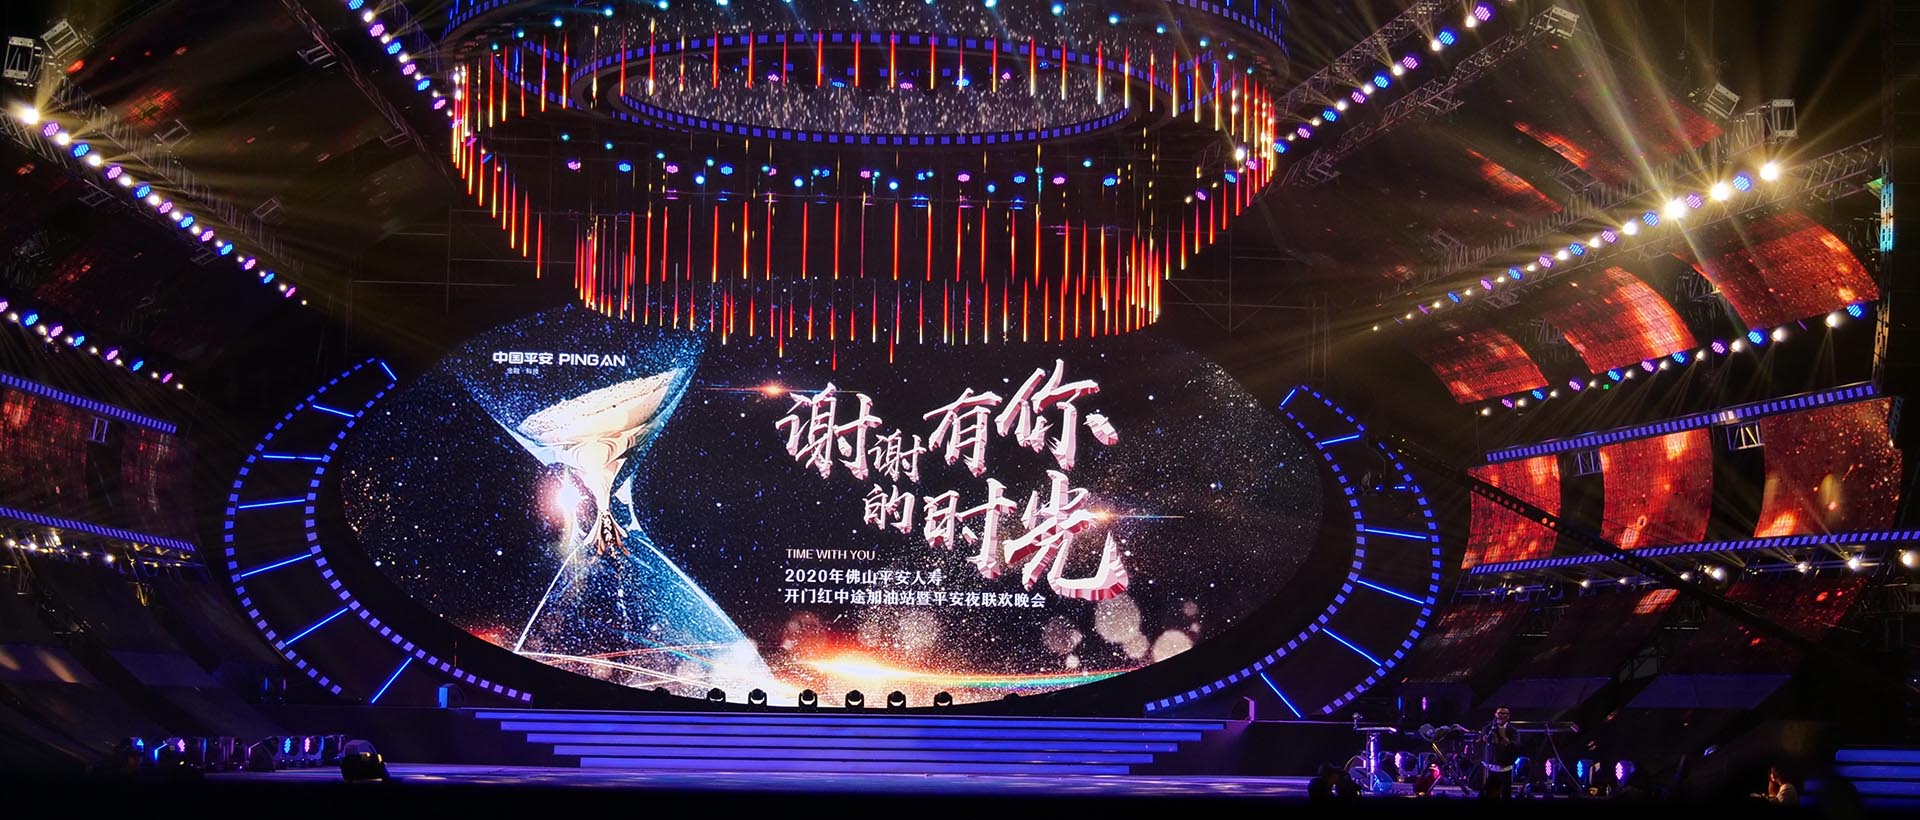 The Closing ceremony of the 2019 China Kung Fu